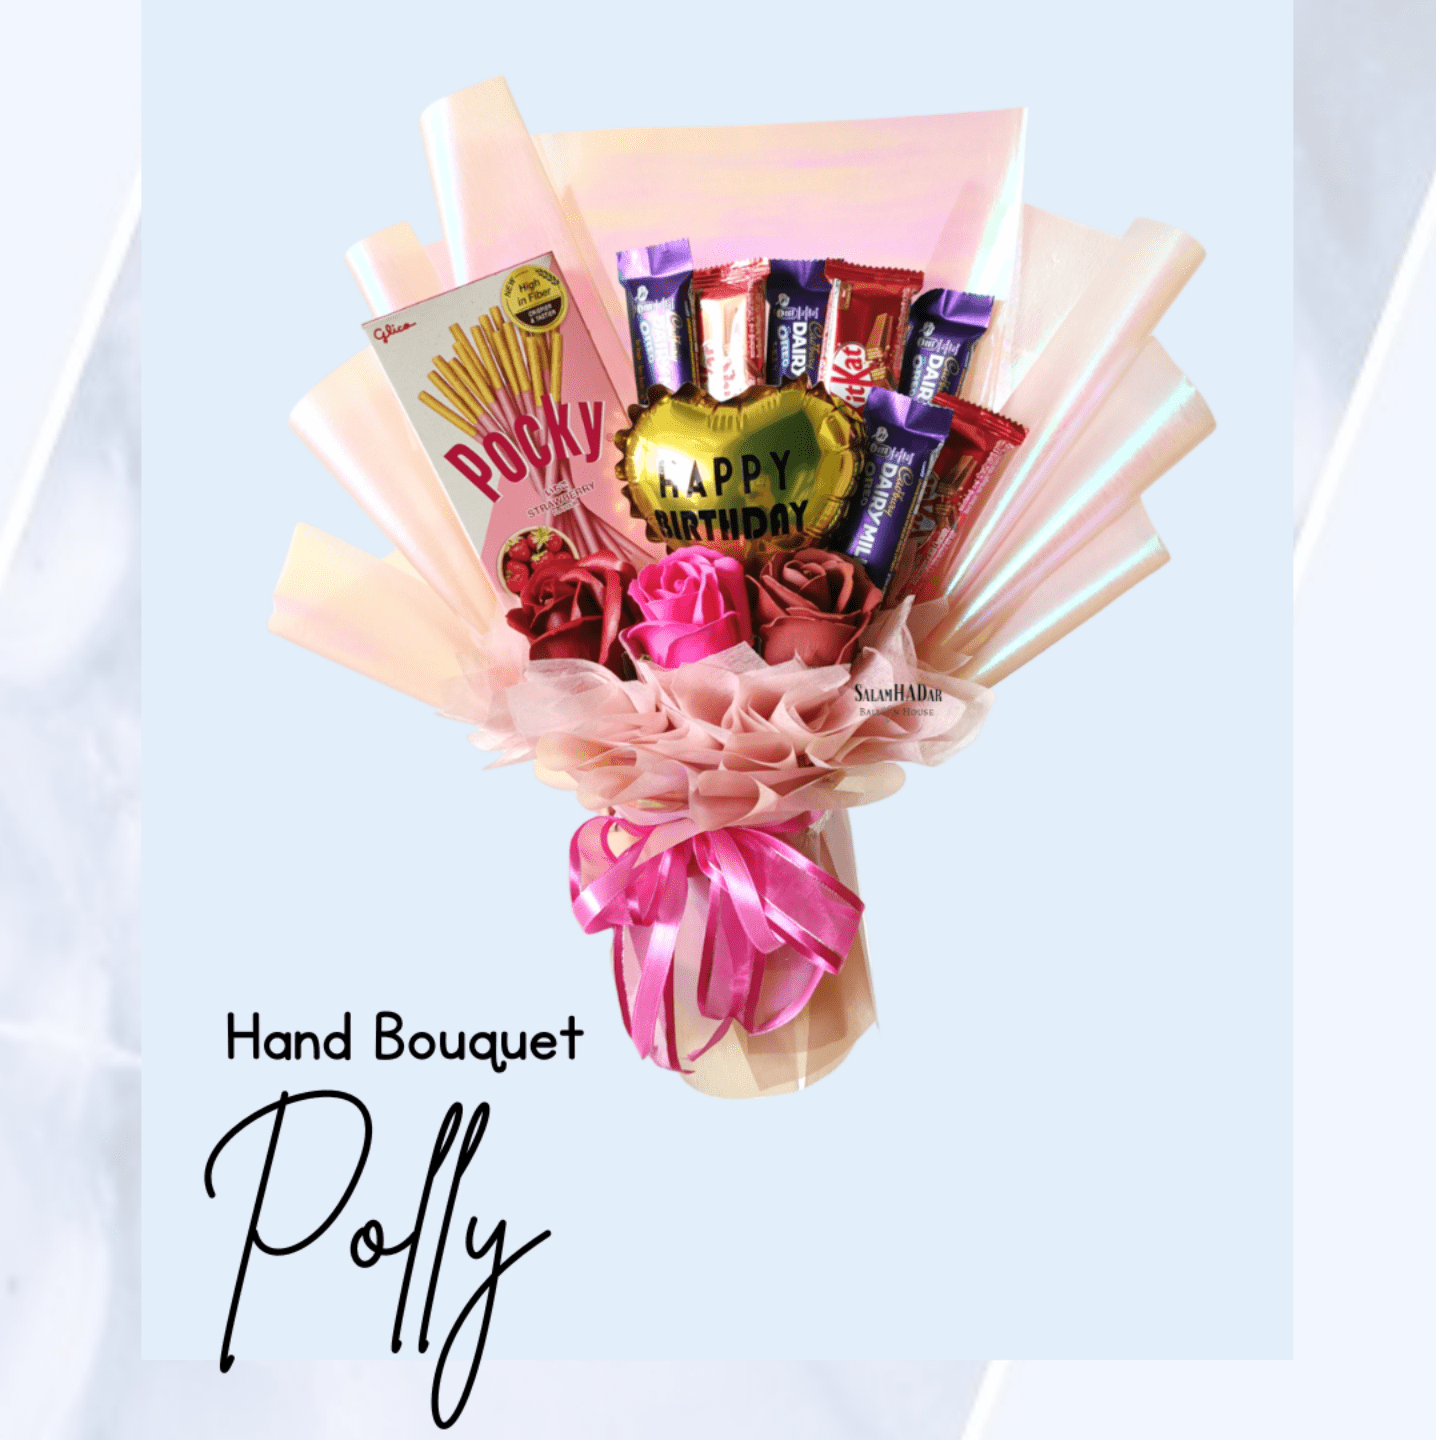 Polly Hand Bouquet